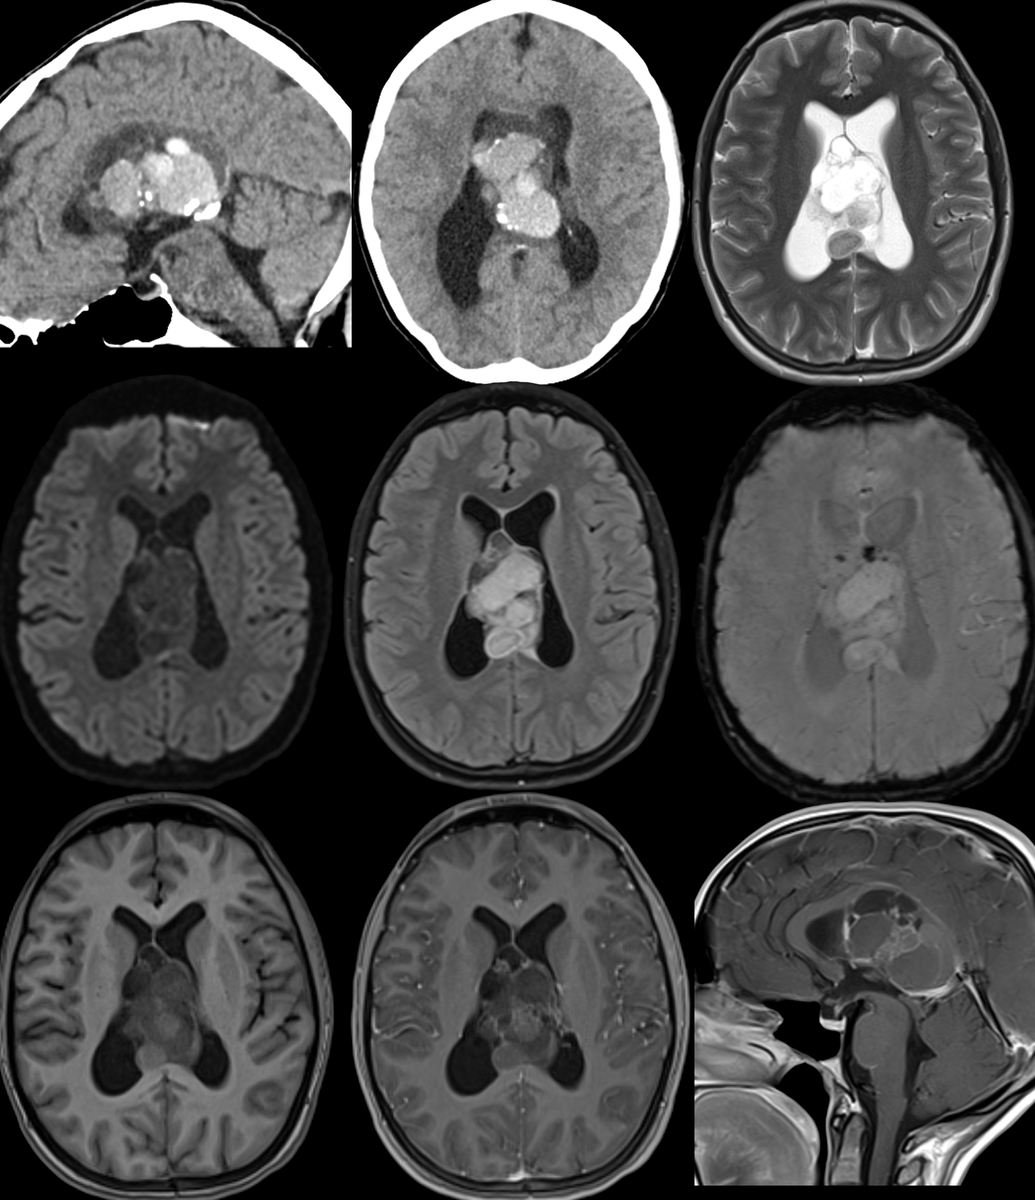 20s male patient presents with sx of hydrocephalus and this lesion is found on imaging. Original read suggested central neurocytoma. Biopsy non-diagnostic, revealing only mucin. CT C/A/P negative. What do you think?